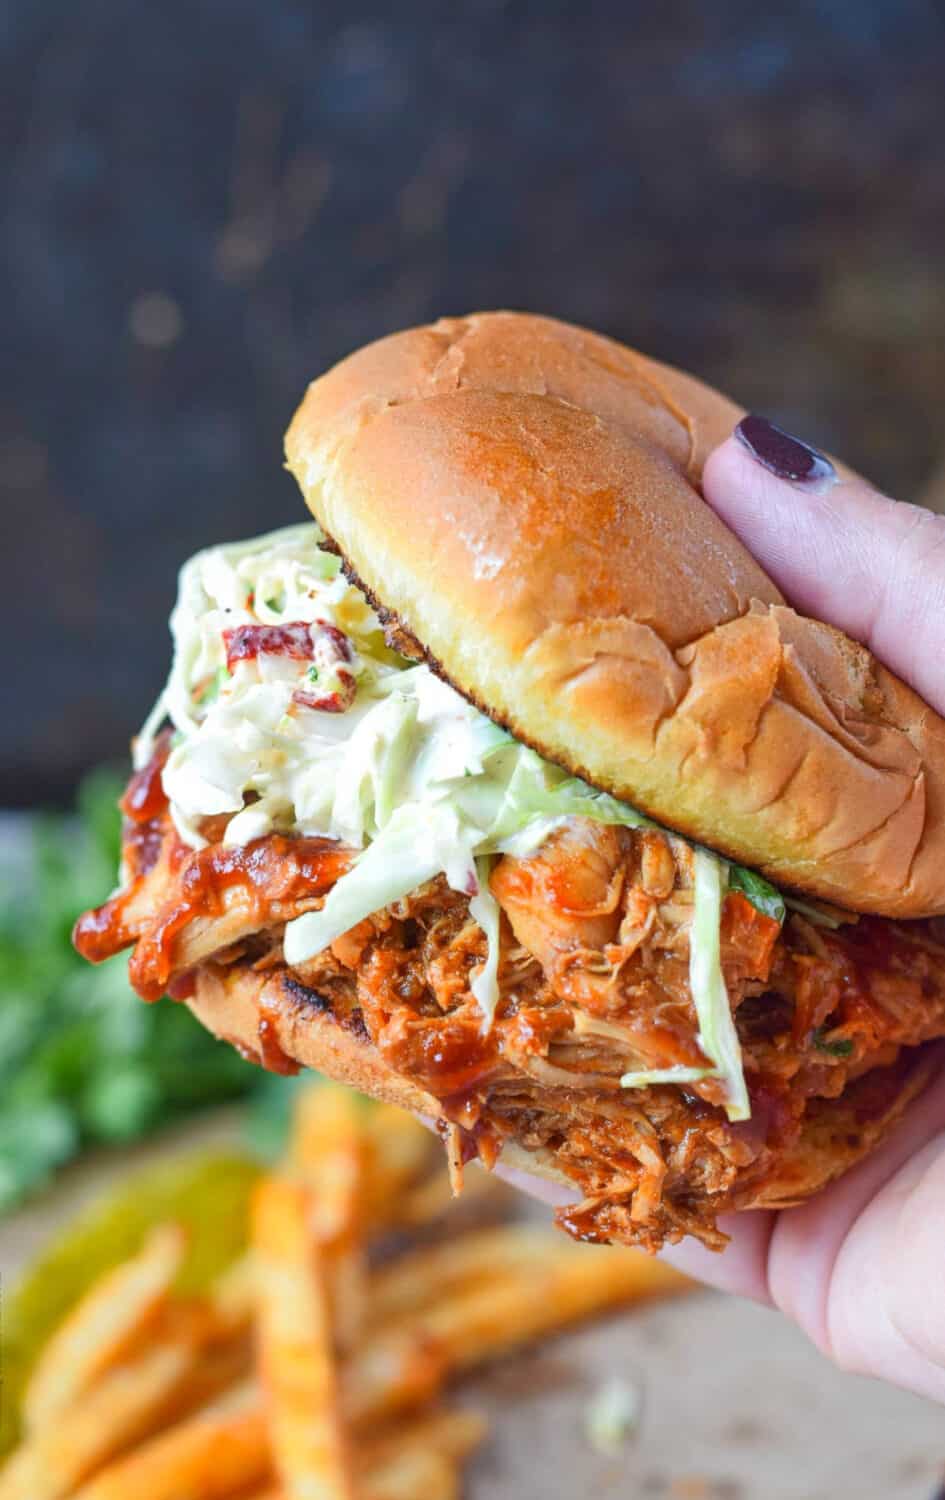 A chicken sandwich with coleslaw being held.